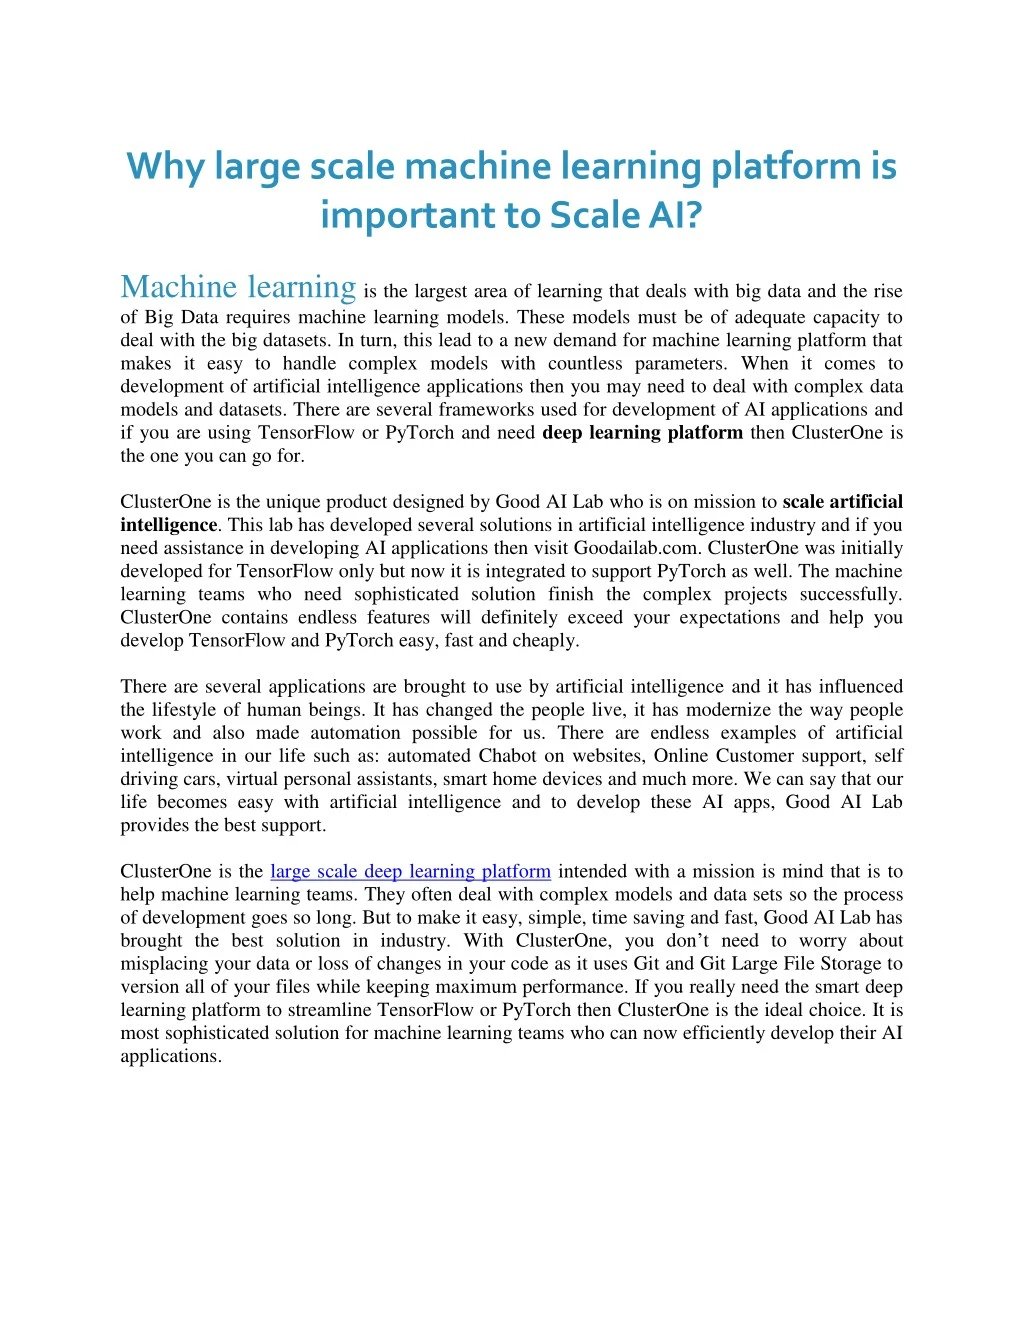 why large scale machine learning platform